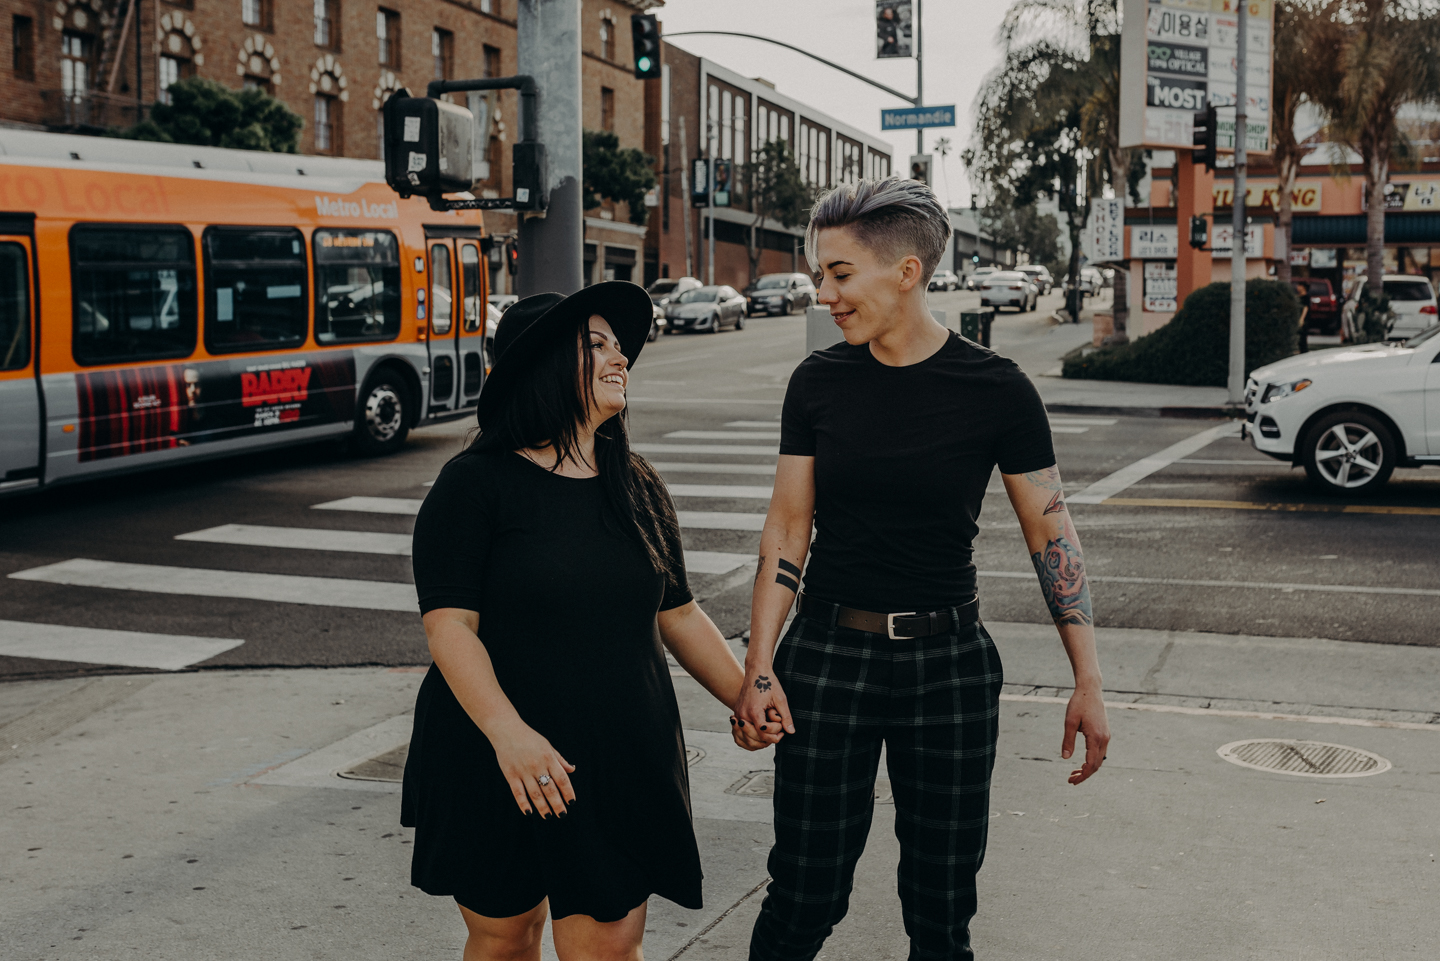 queer wedding photographer in los angeles - lesbian engagement session los angeles - isaiahandtaylor.com-013.jpg